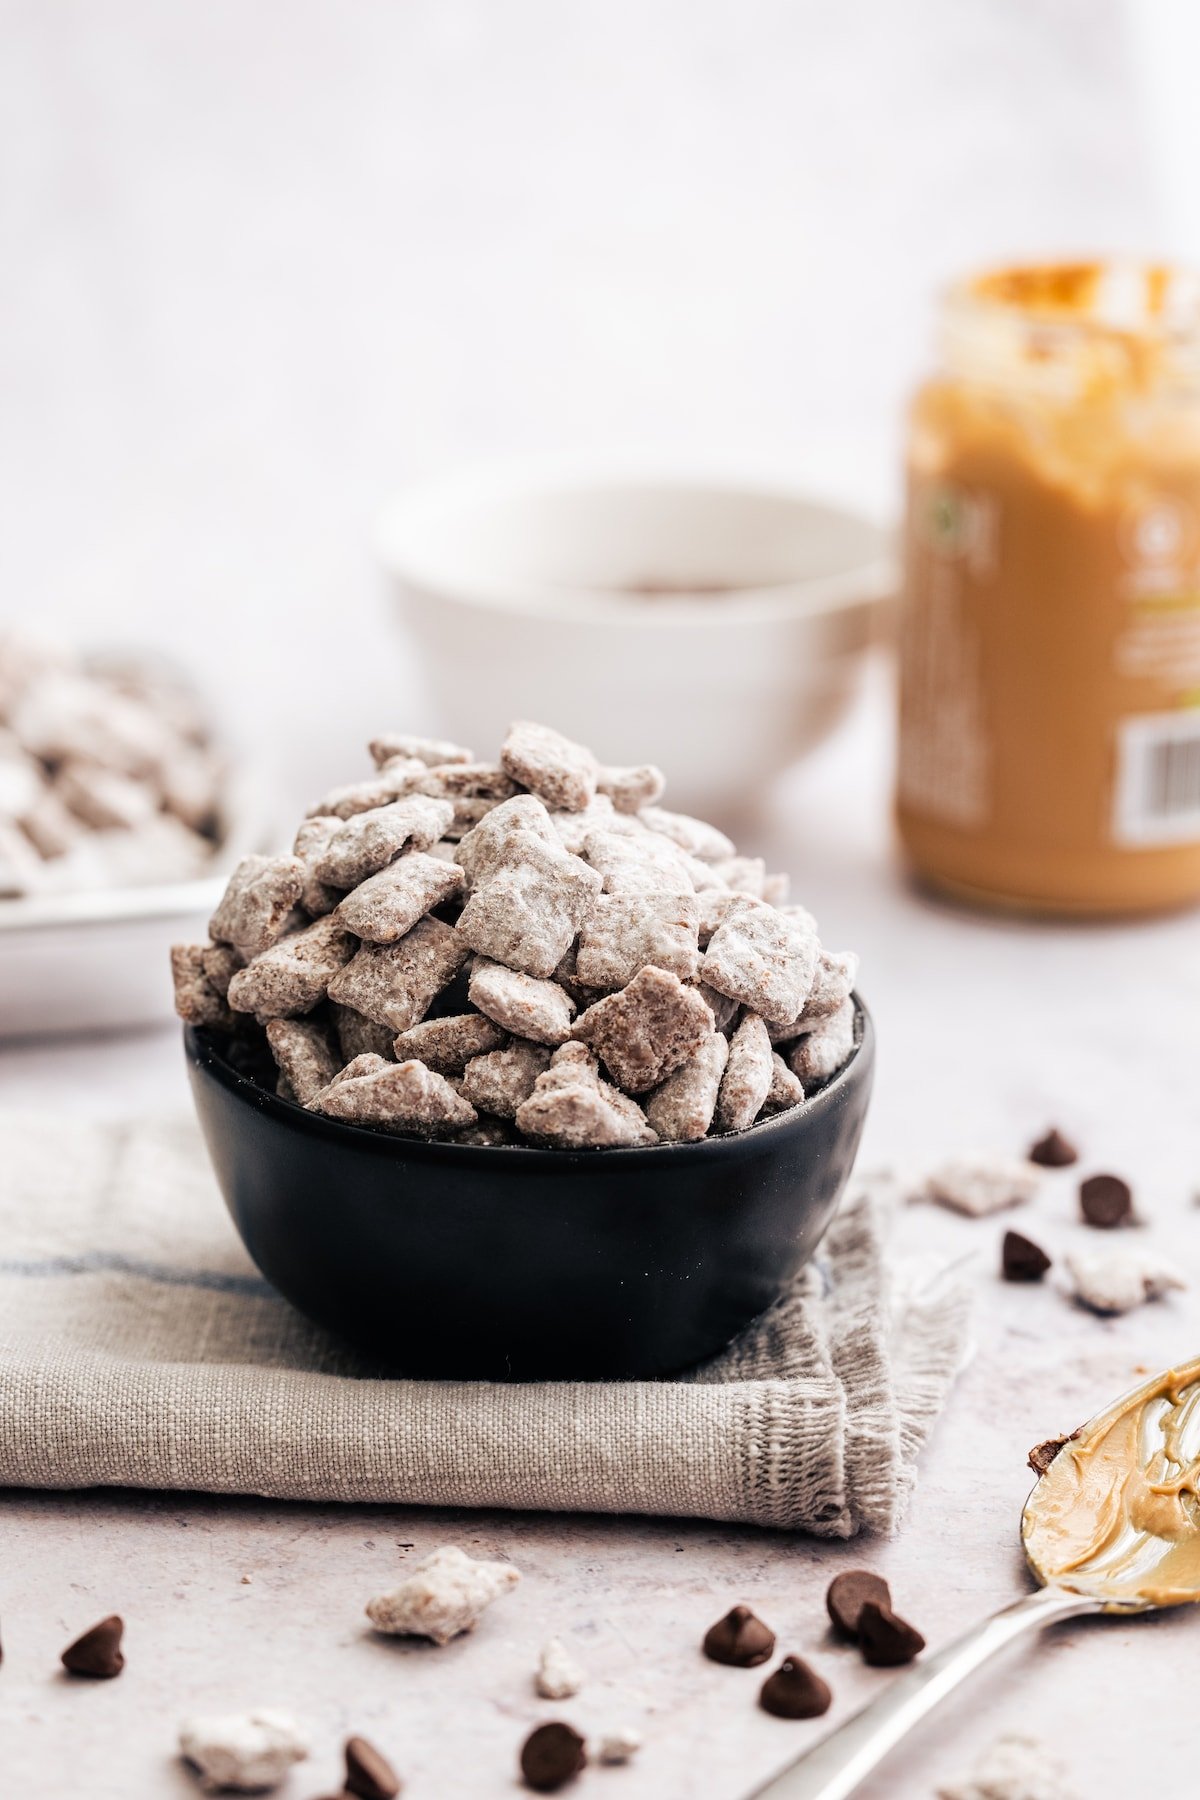 A bowl of puppy chow on a grey cloth with a jar of peanut butter in the background.